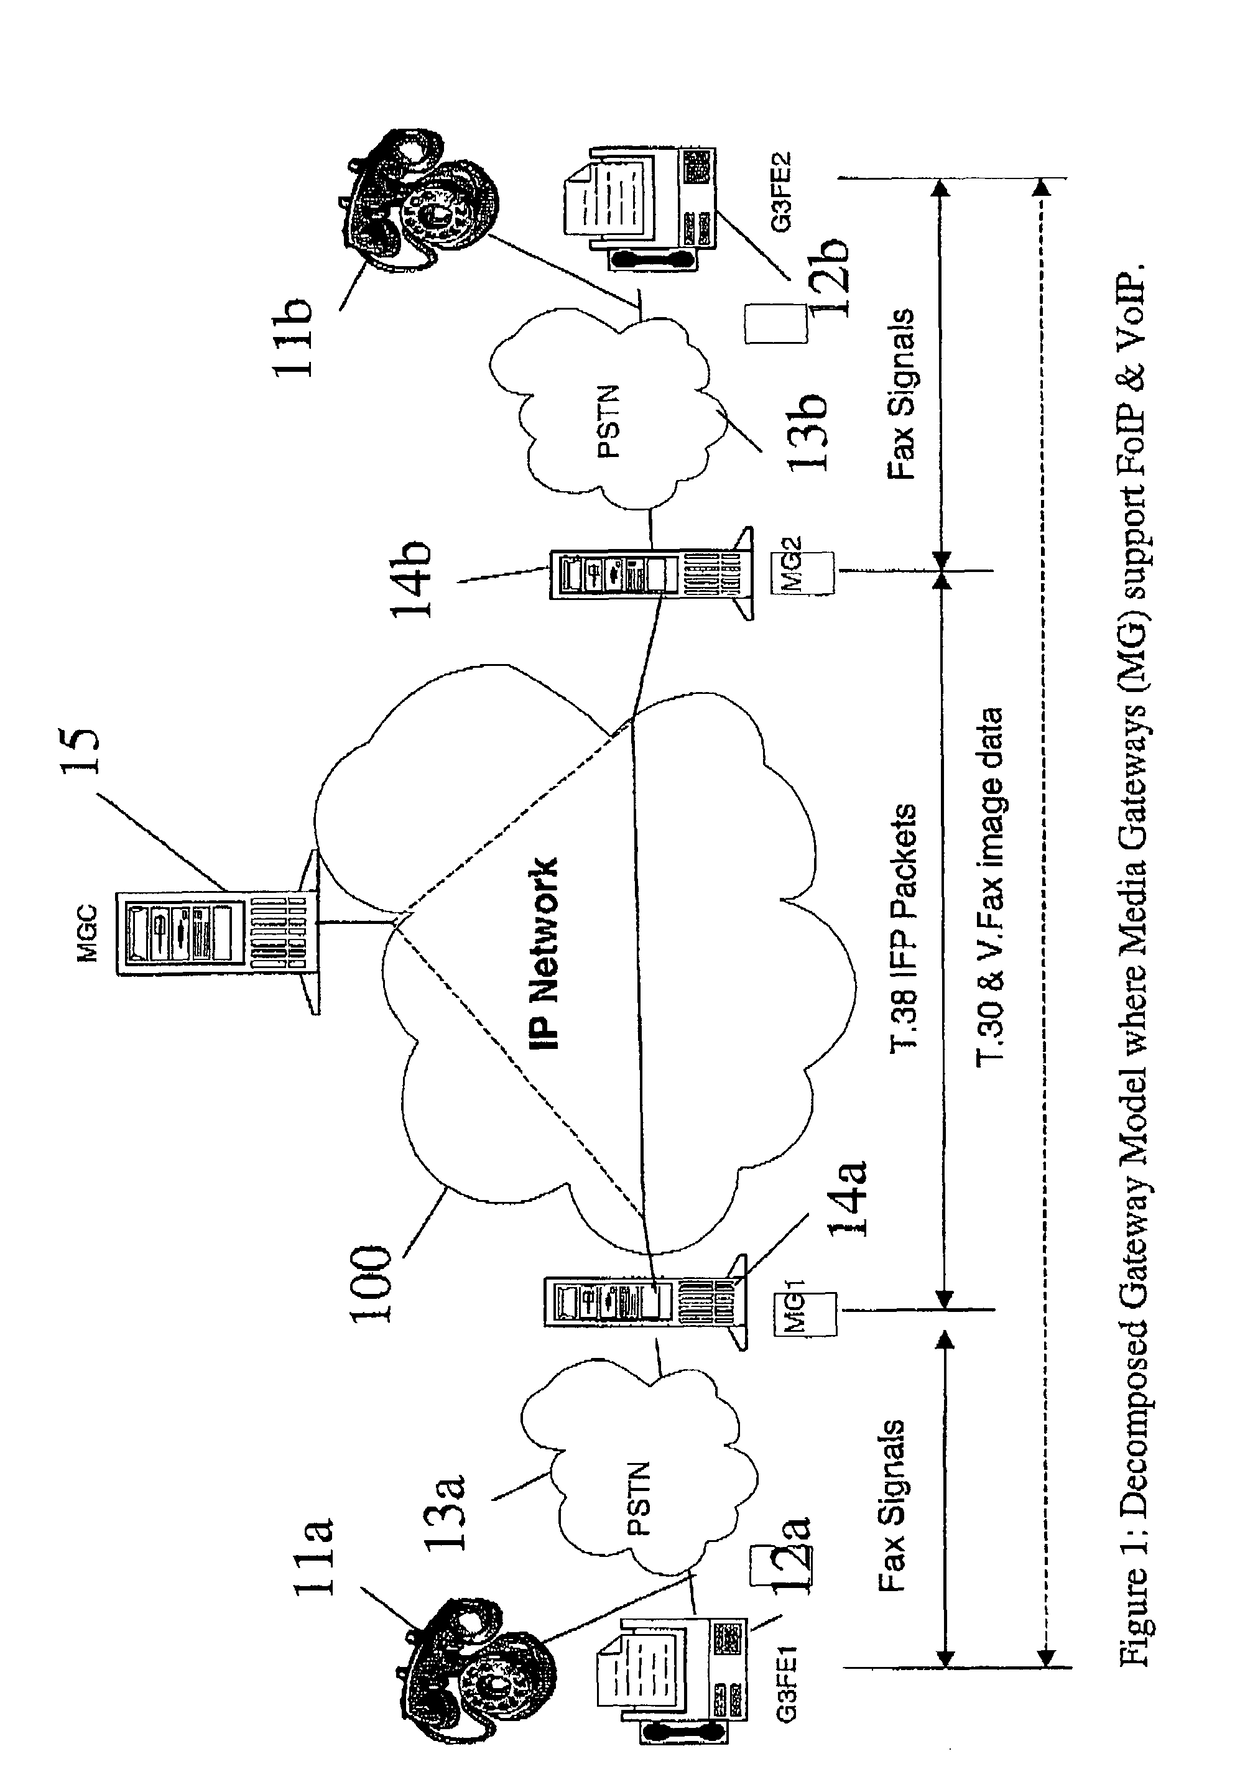 Voice and fax over IP call establishment in a communications network